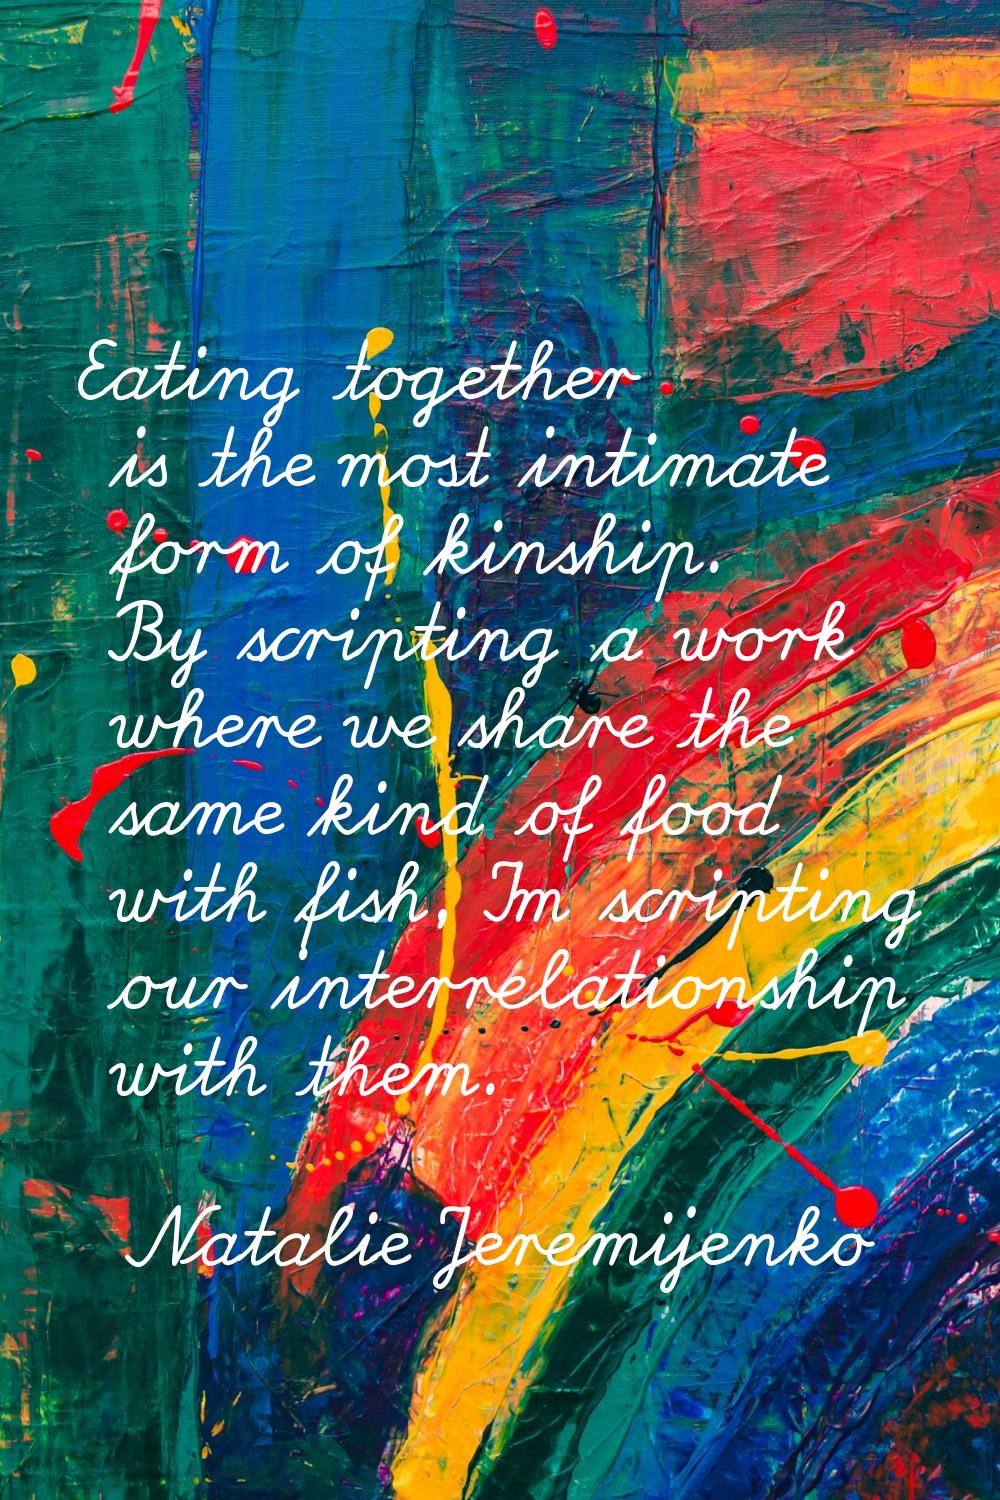 Eating together is the most intimate form of kinship. By scripting a work where we share the same k